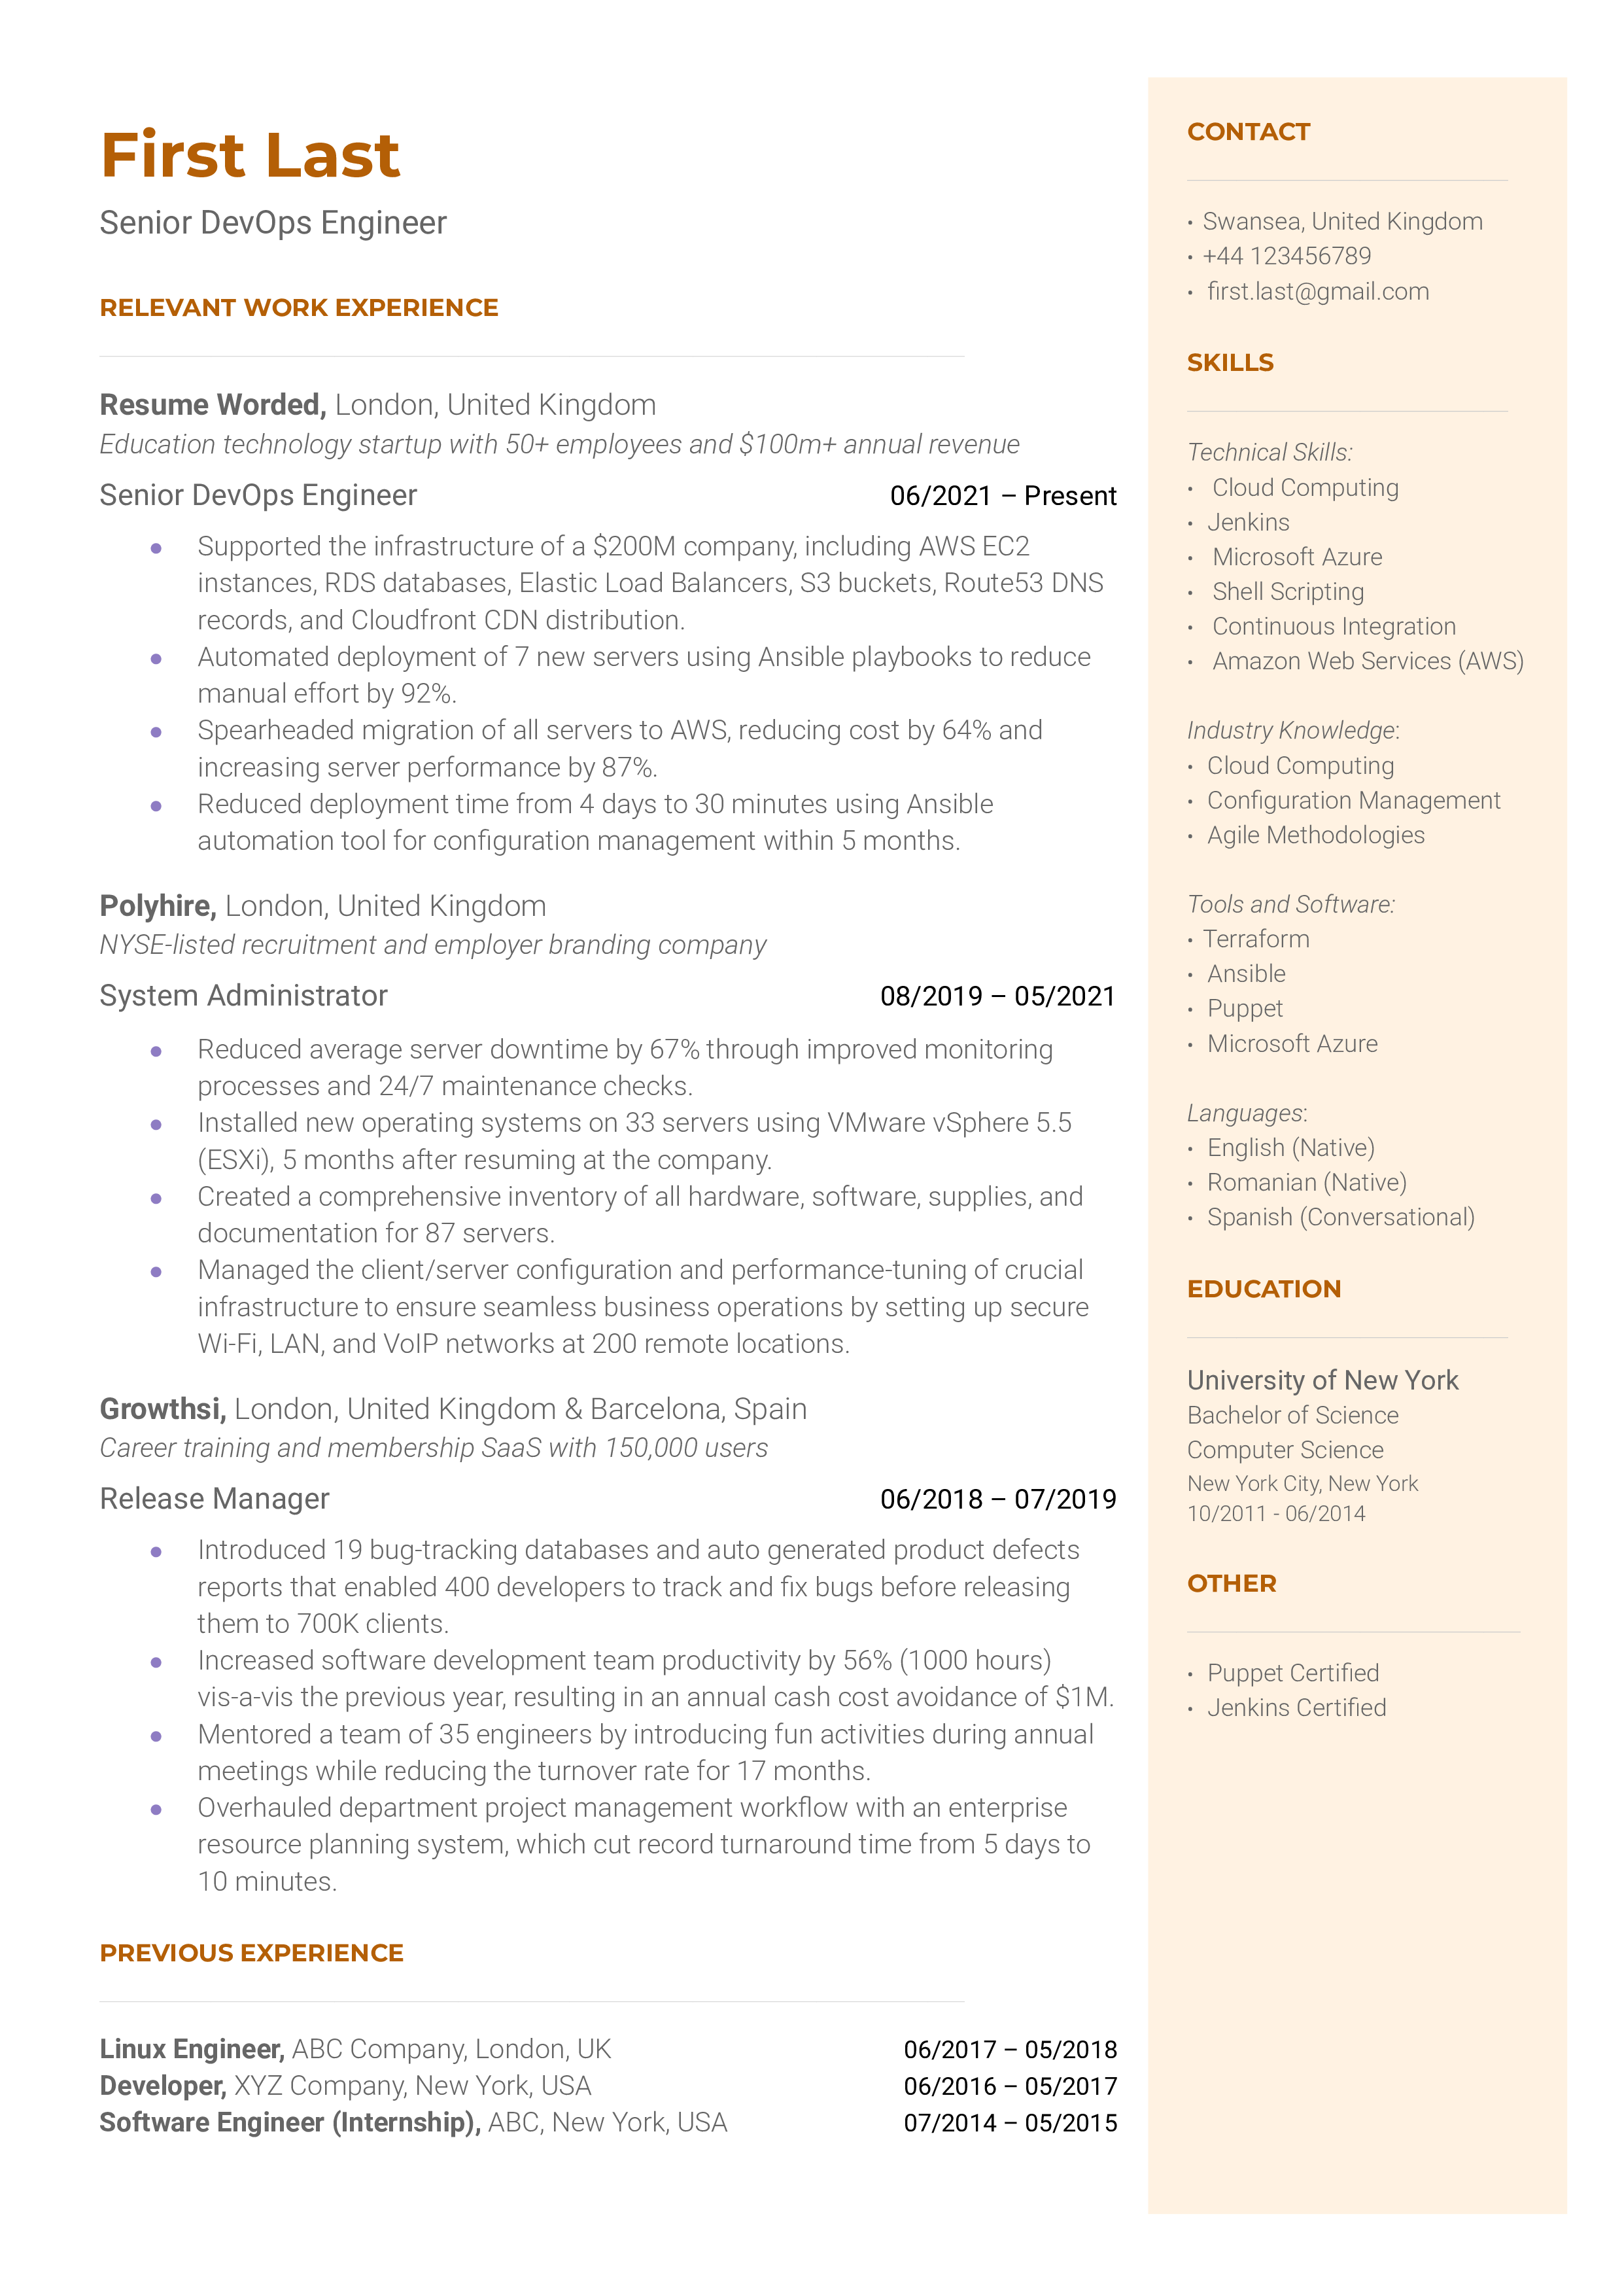 A senior DevOps engineer resume sample that highlights the applicant’s strong skills section and career progression.